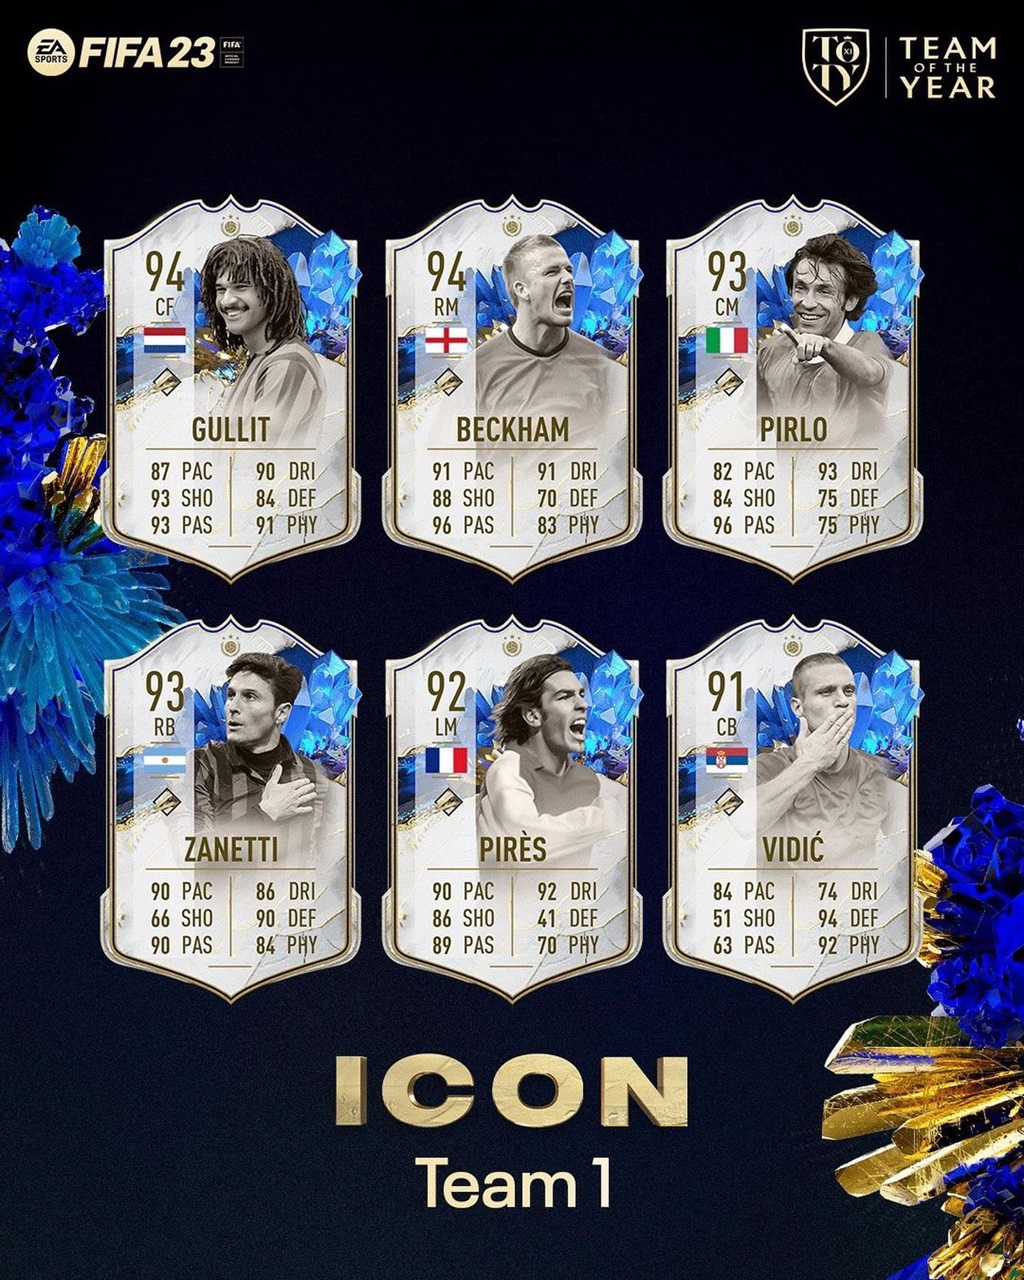 Team 1 of the FIFA 23 #TOTY Icons.